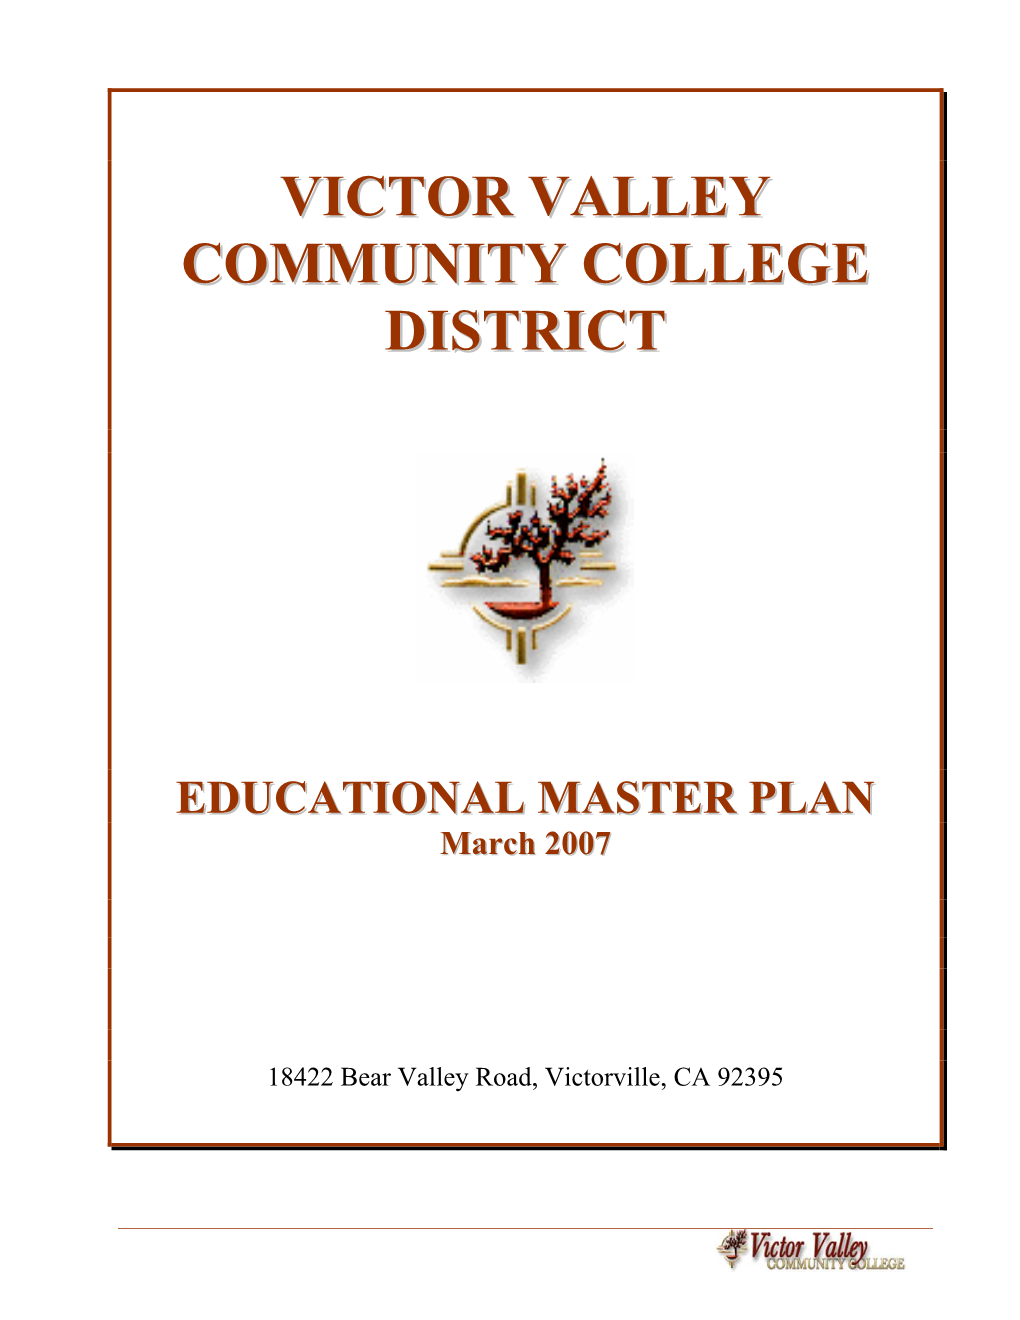 Educational Master Plan Is an Important Achievement for Us